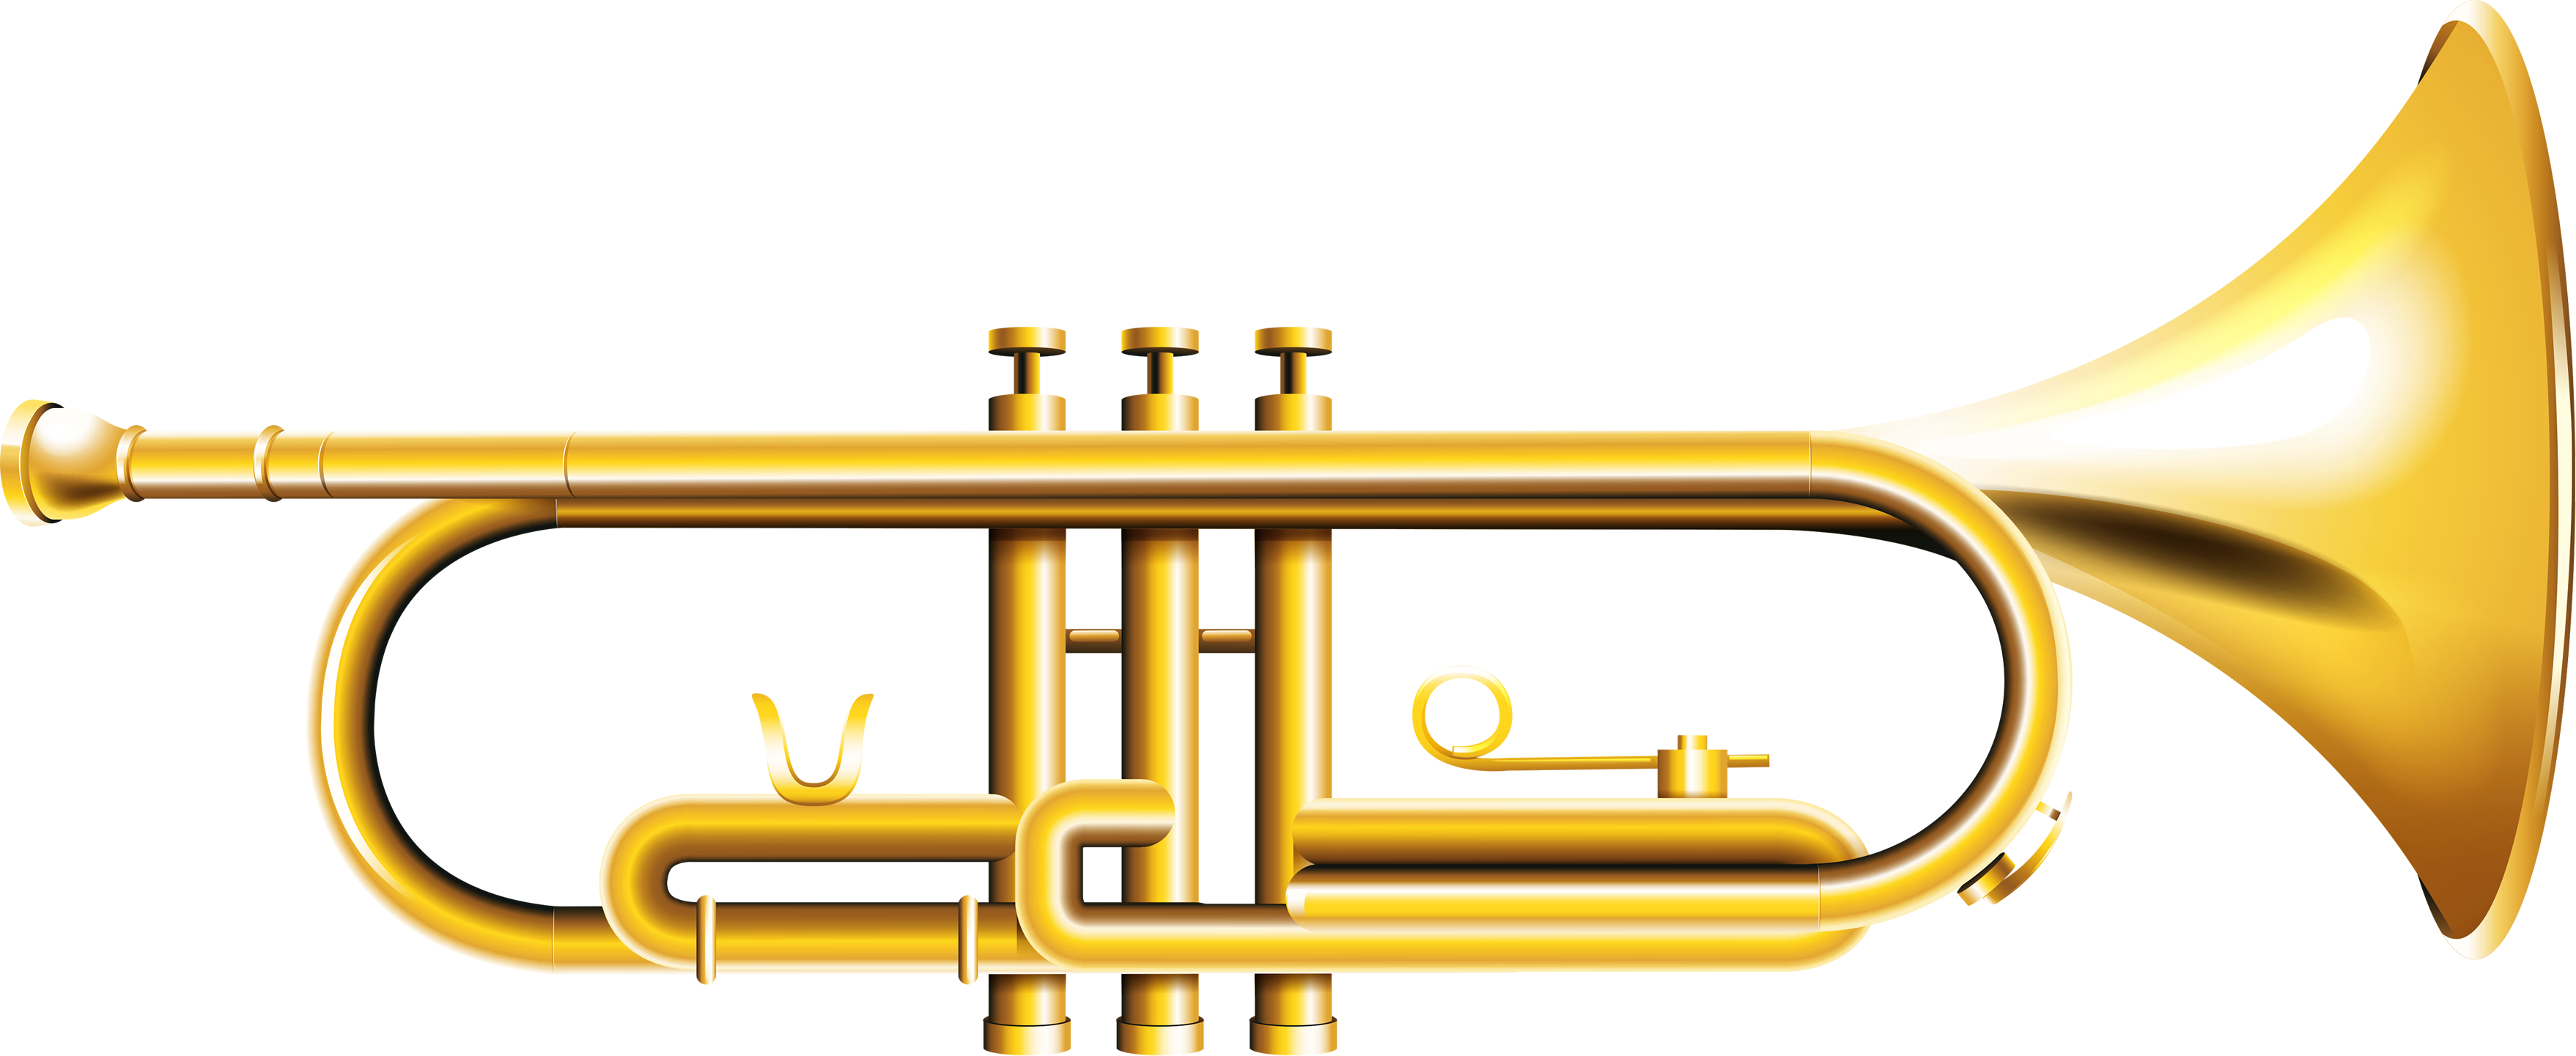 Trumpet Png - Trumpet With Music Notes (3515x1441)